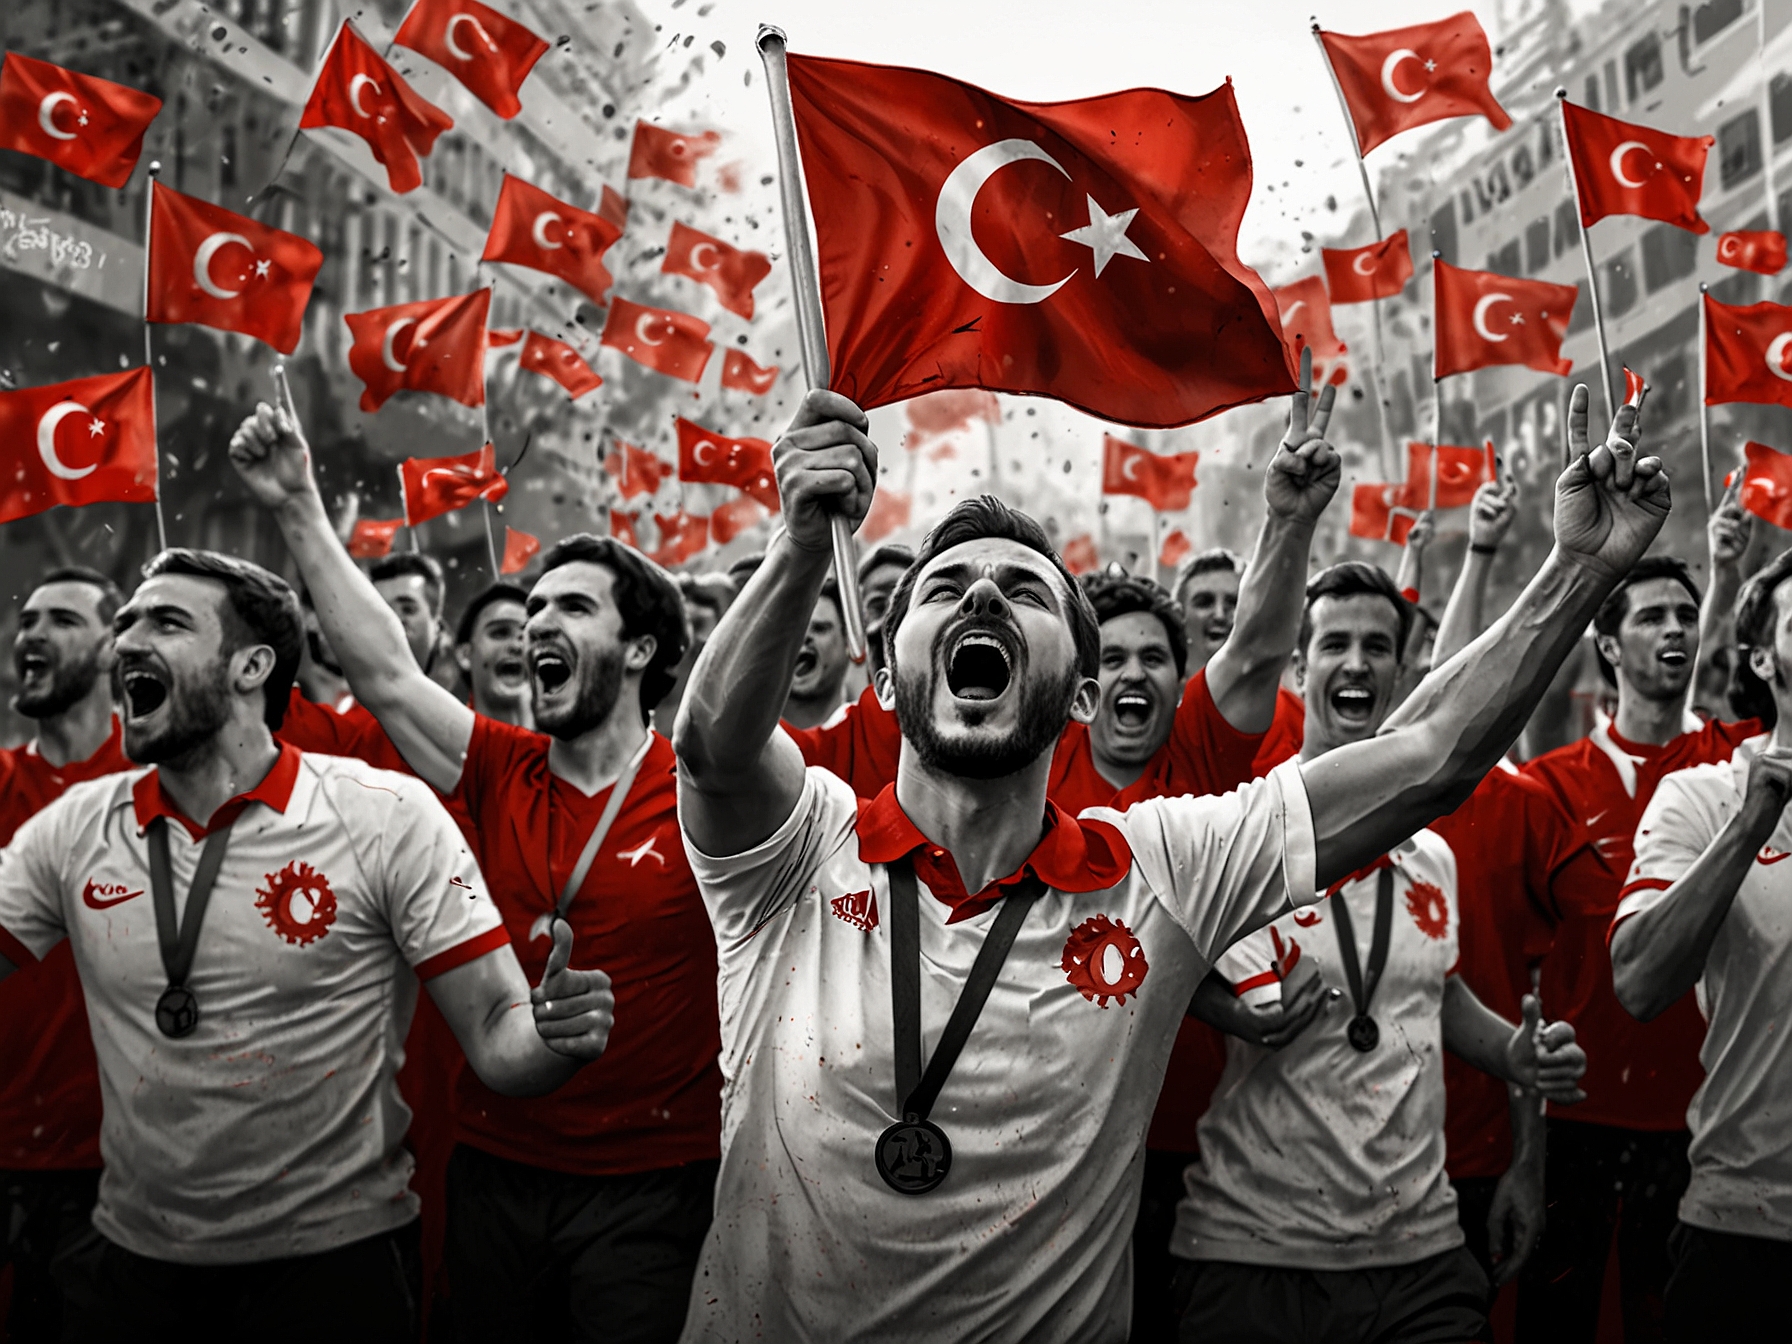 A passionate scene of Turkish fans, adorned in red and white, waving flags and cheering their national team, embodies the fervent support and high hopes for Euro 2024.